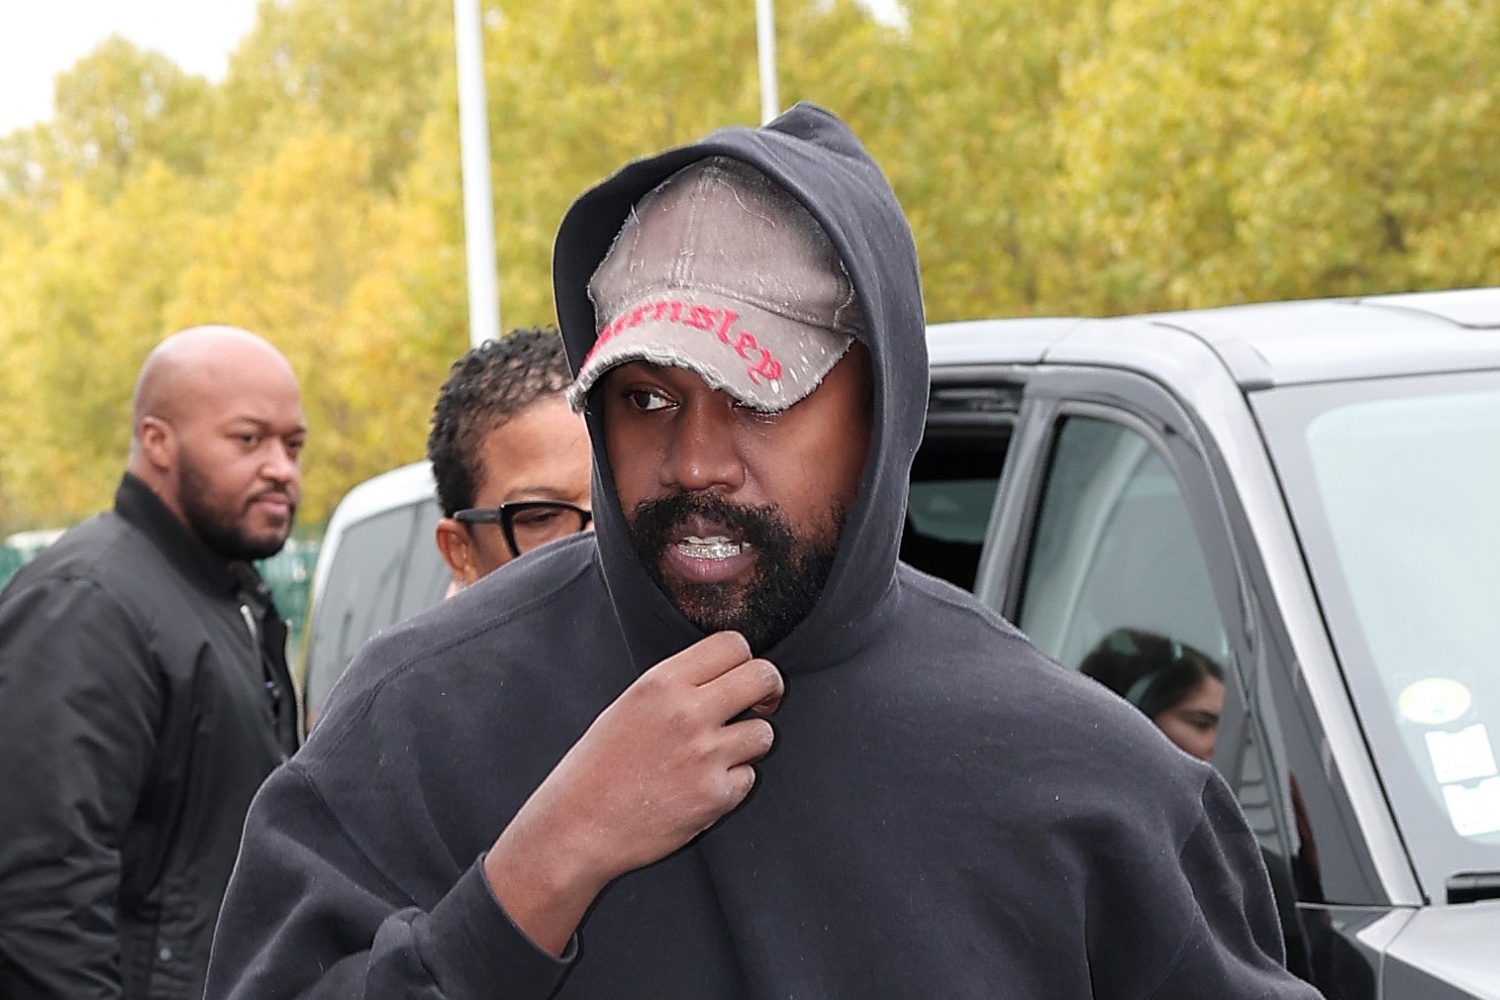 Yeezy in Crisis? Kanye West Halts Site Orders as Prices Plunge, Other Financial Issues Emerge